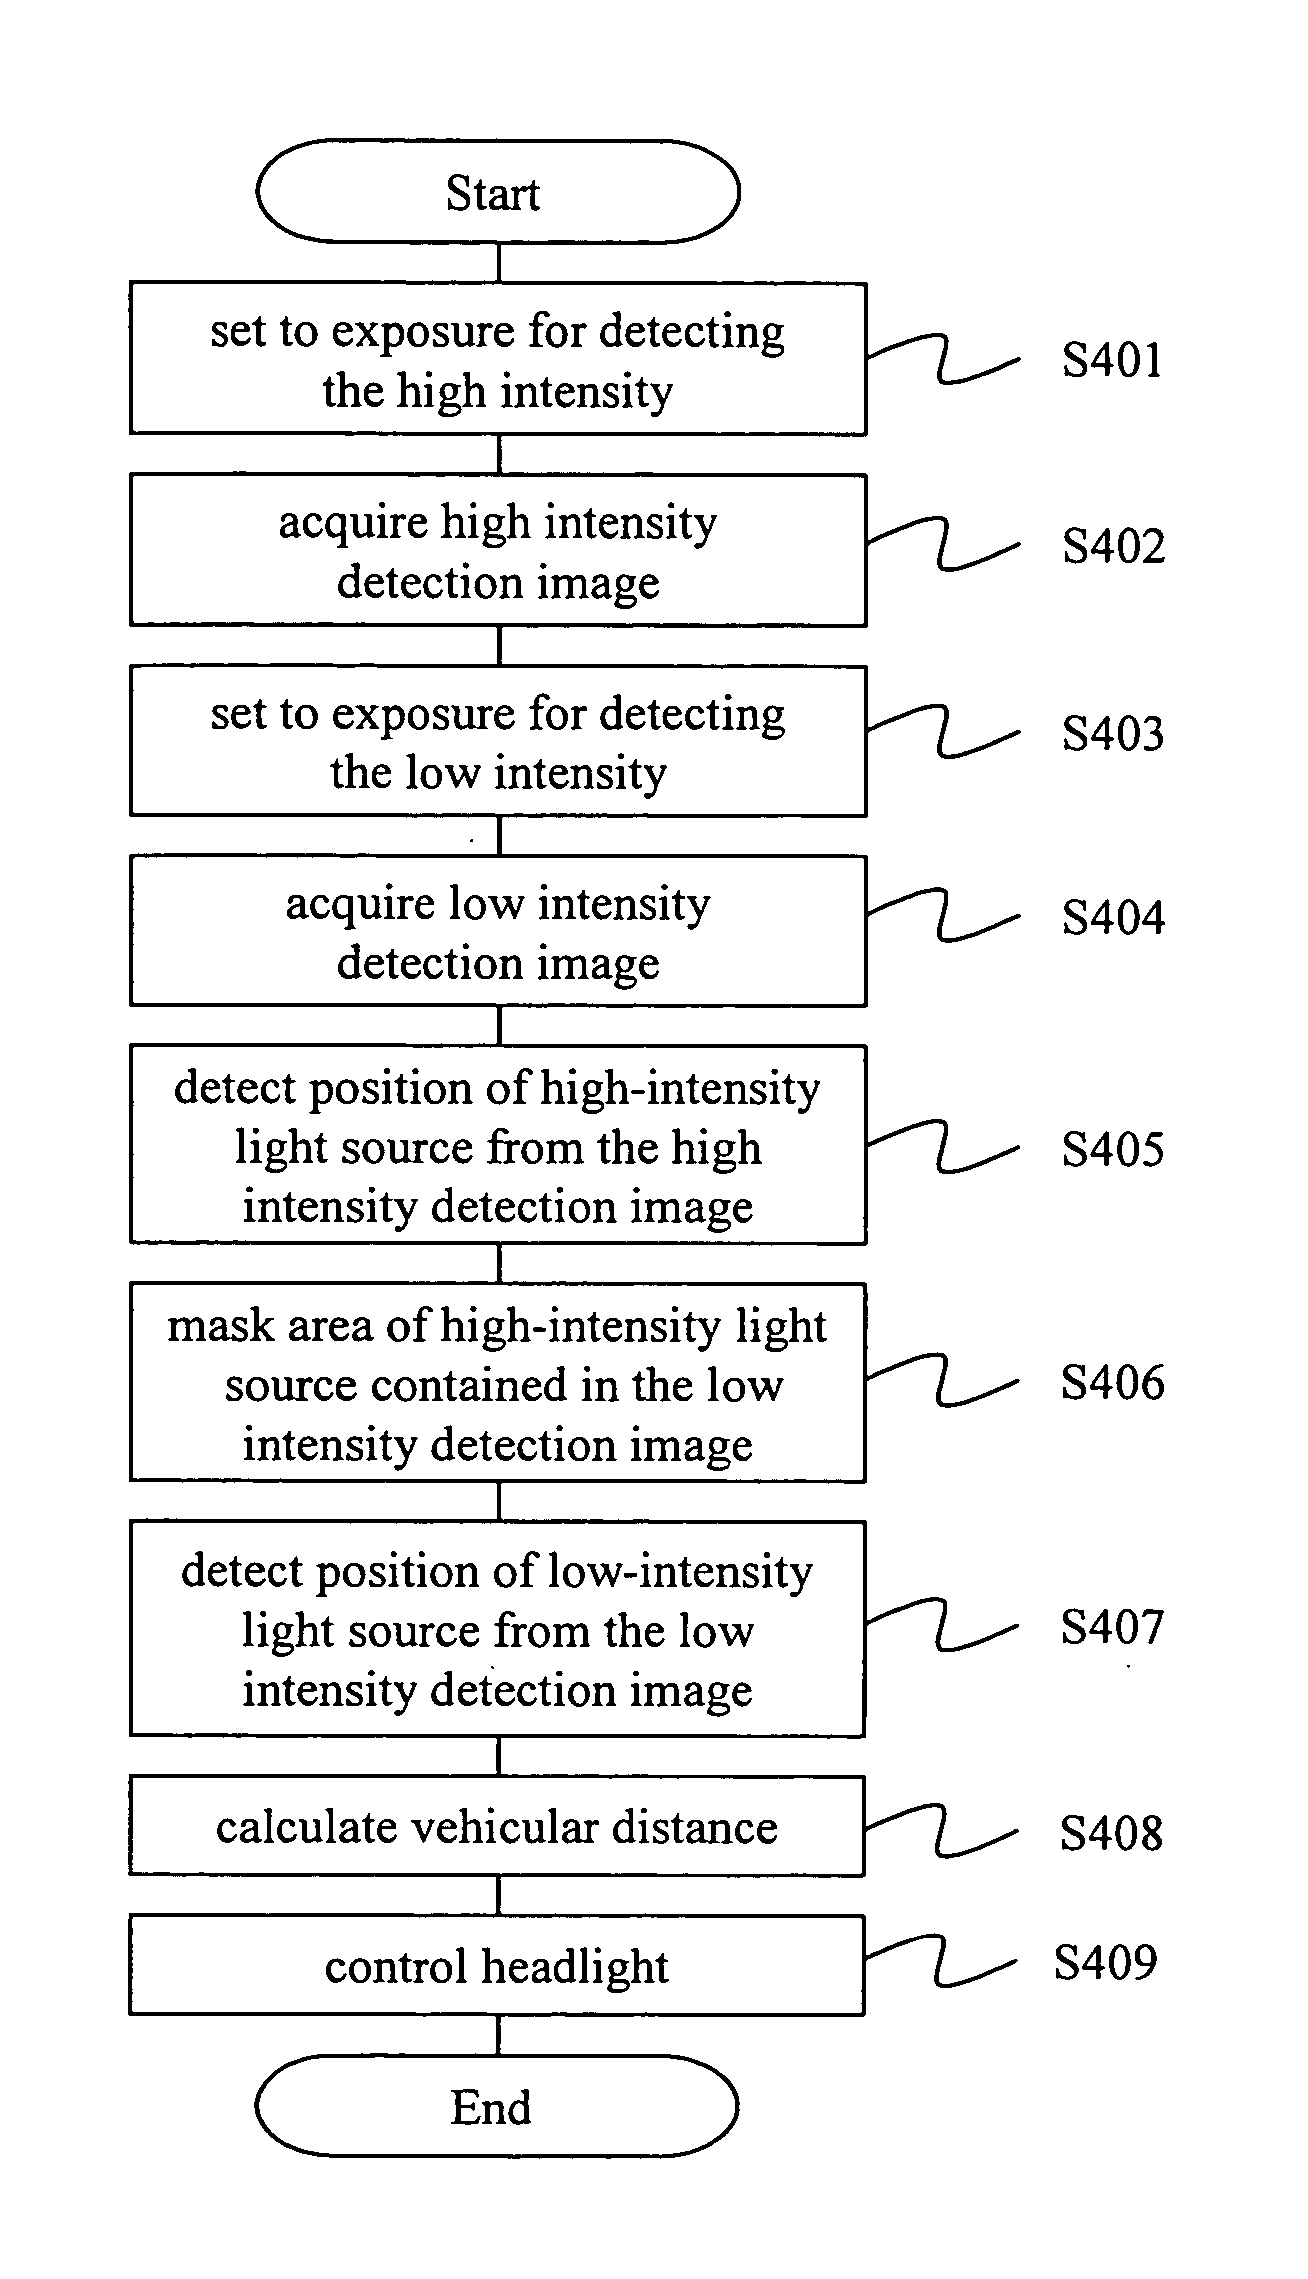 Image processing system and vehicle control system